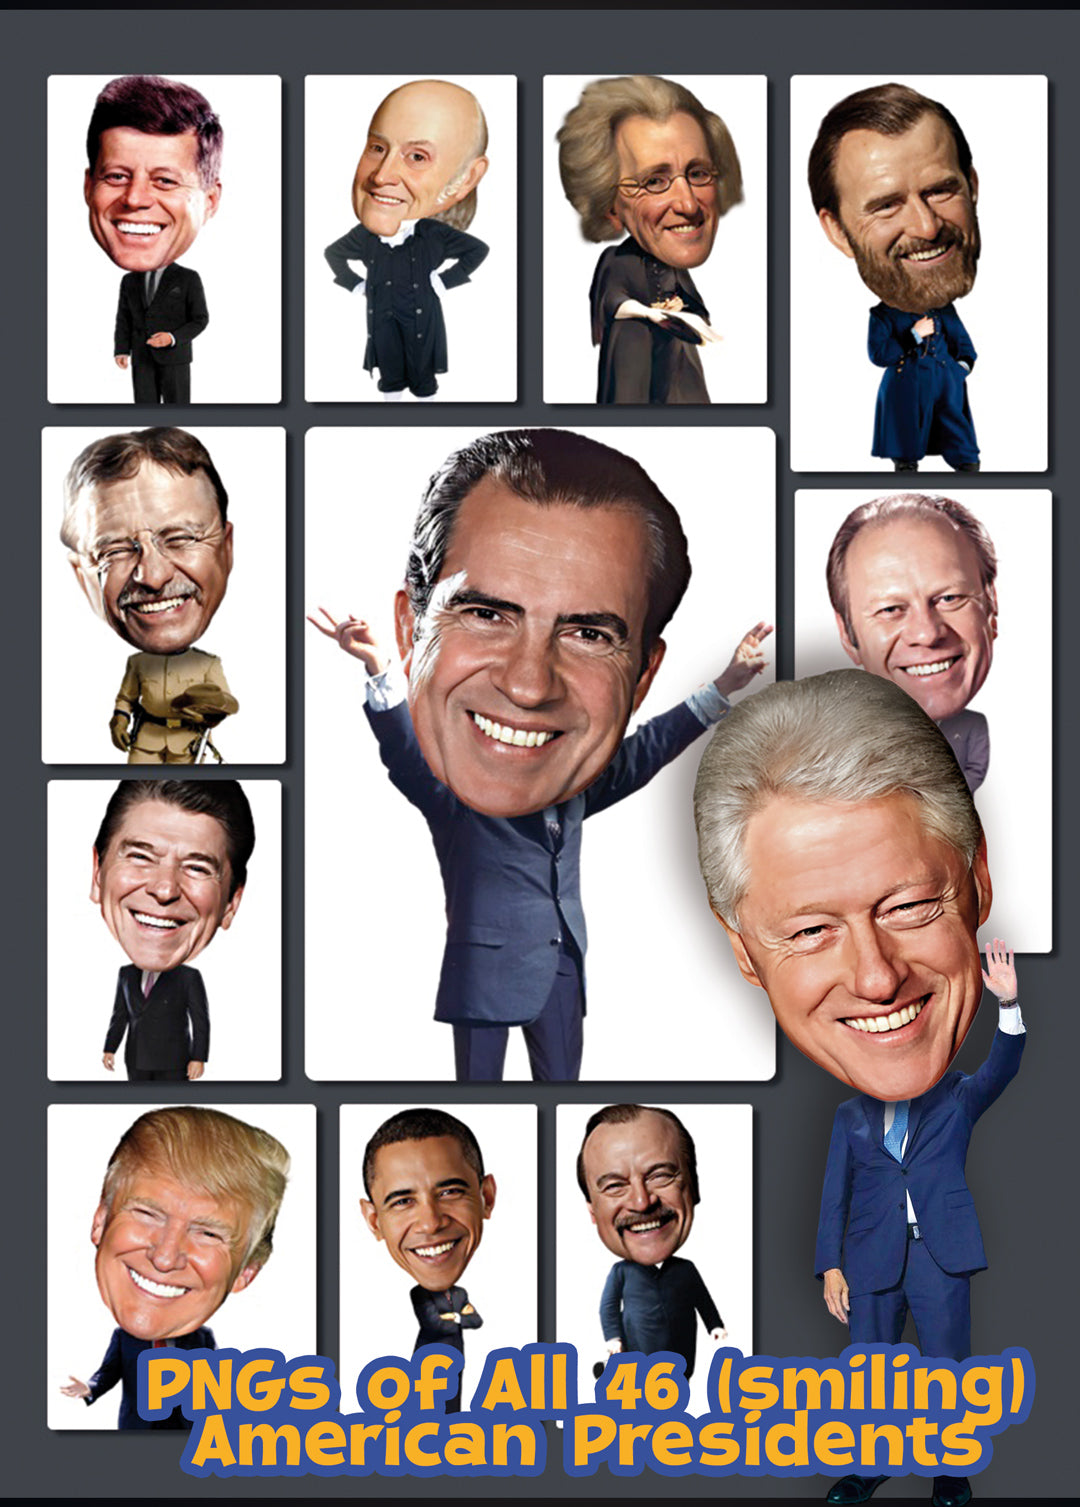 Hall of (Smiling) Presidents